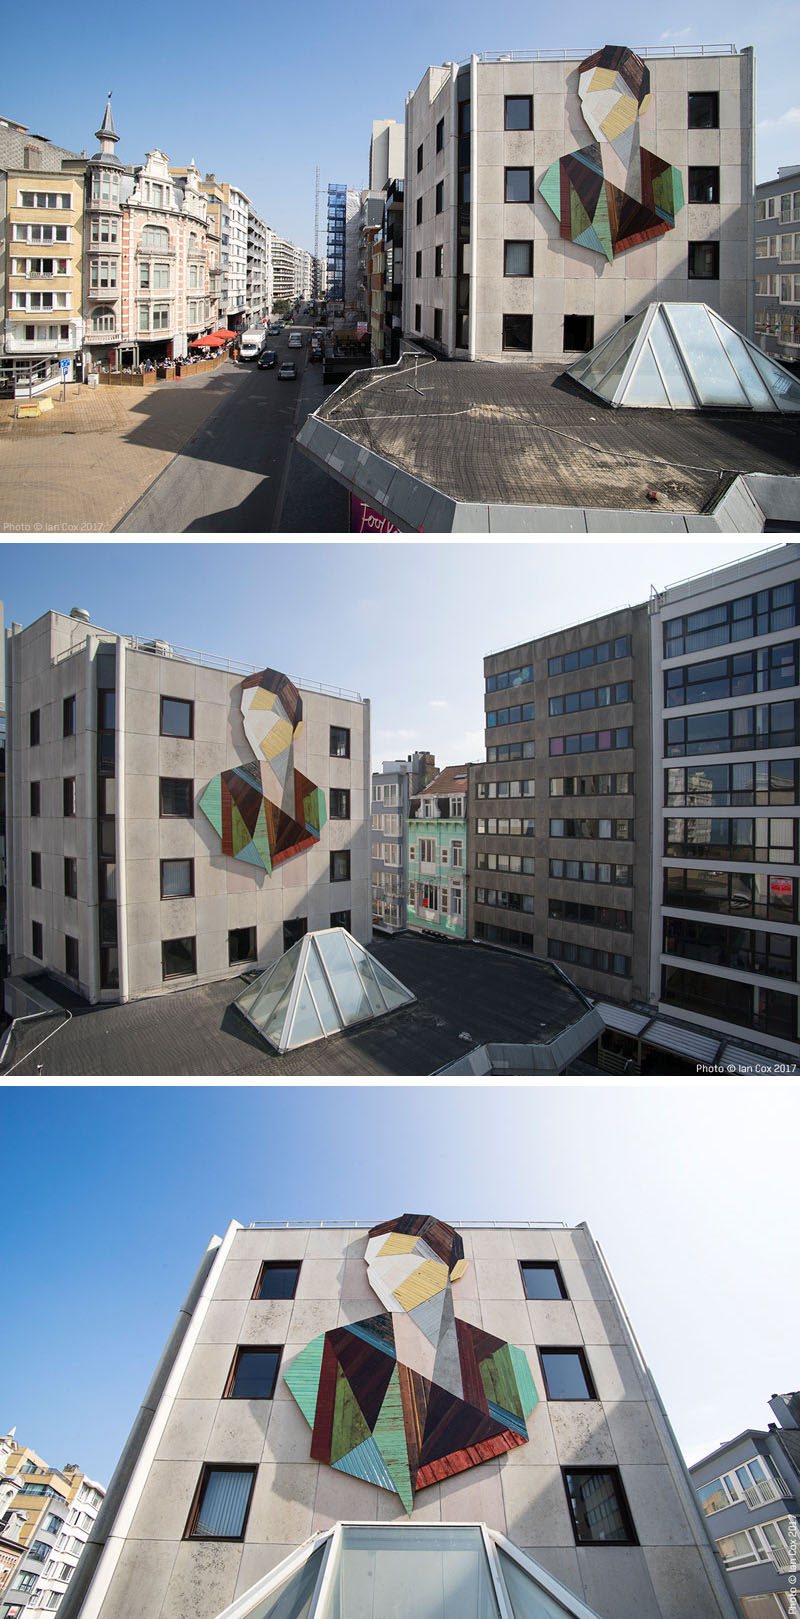 Artist Stefaan De Crook (also known as Strook), has created a large recycled wood mural on the side of a building in Ostend, a coastal city in Belgium.